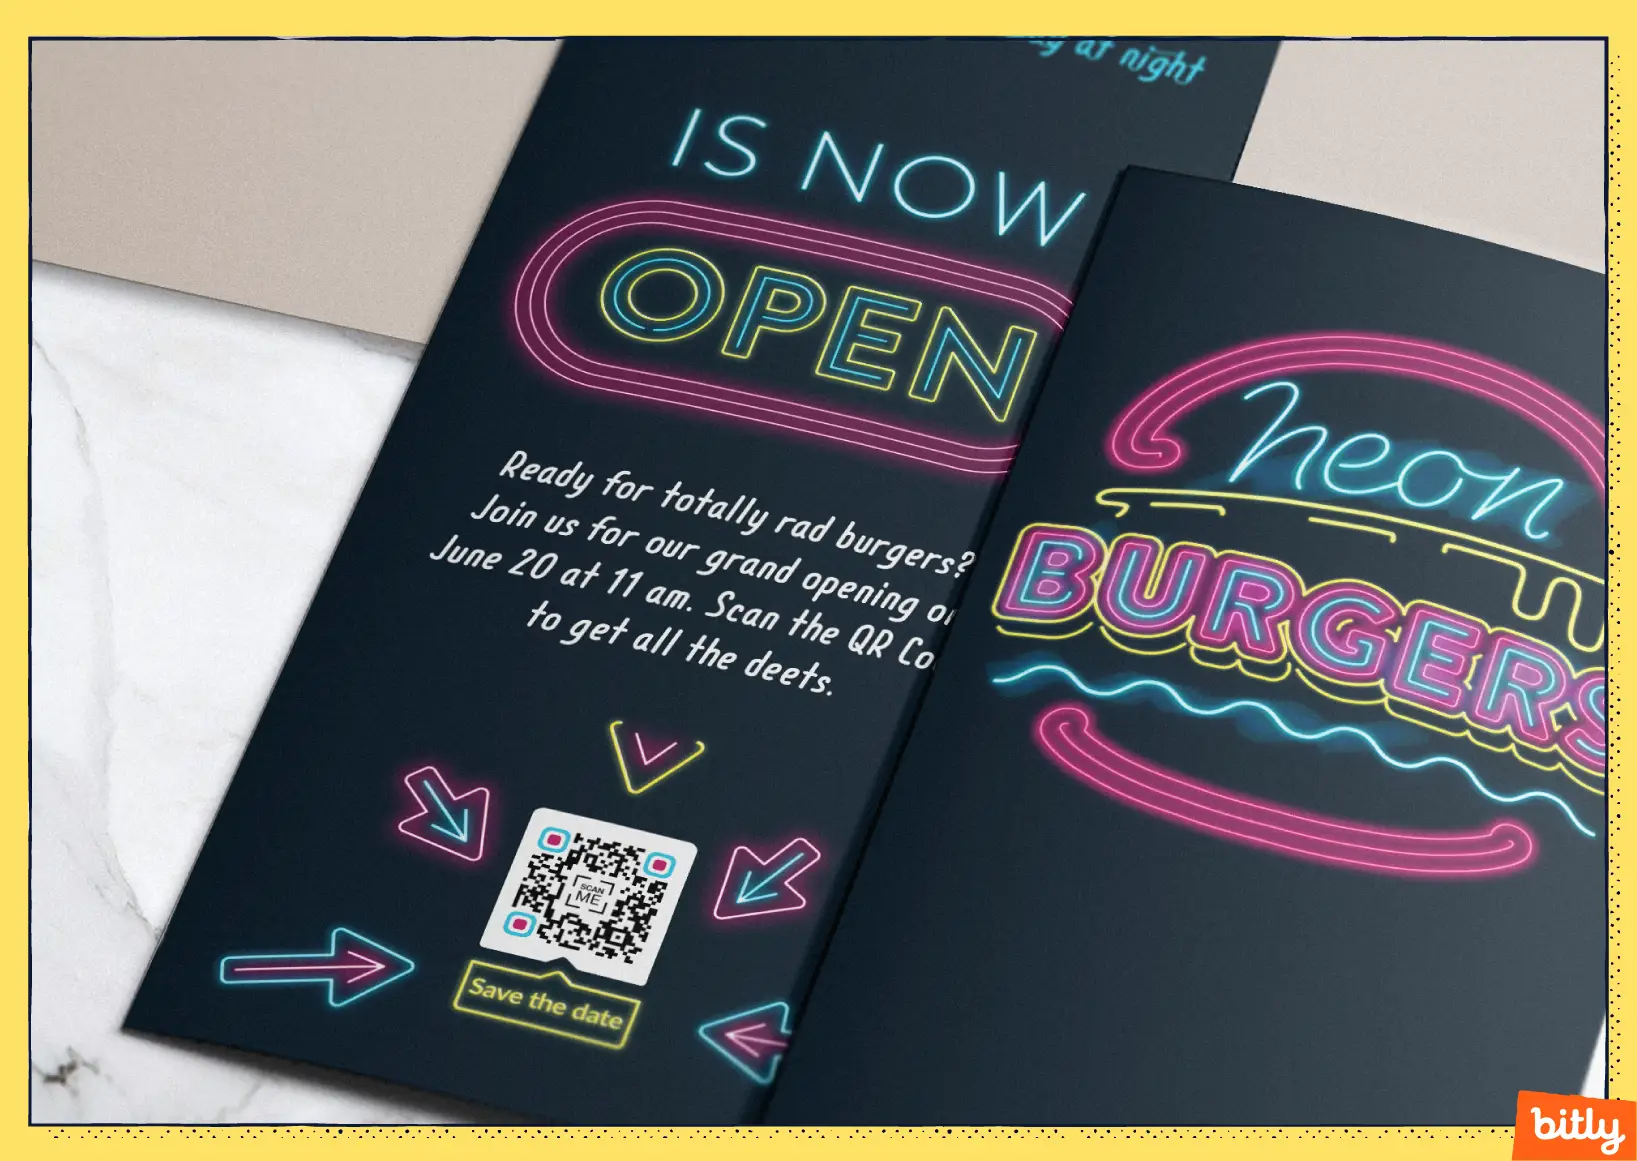 A QR Code on the back of a brochure for a burger restaurant.